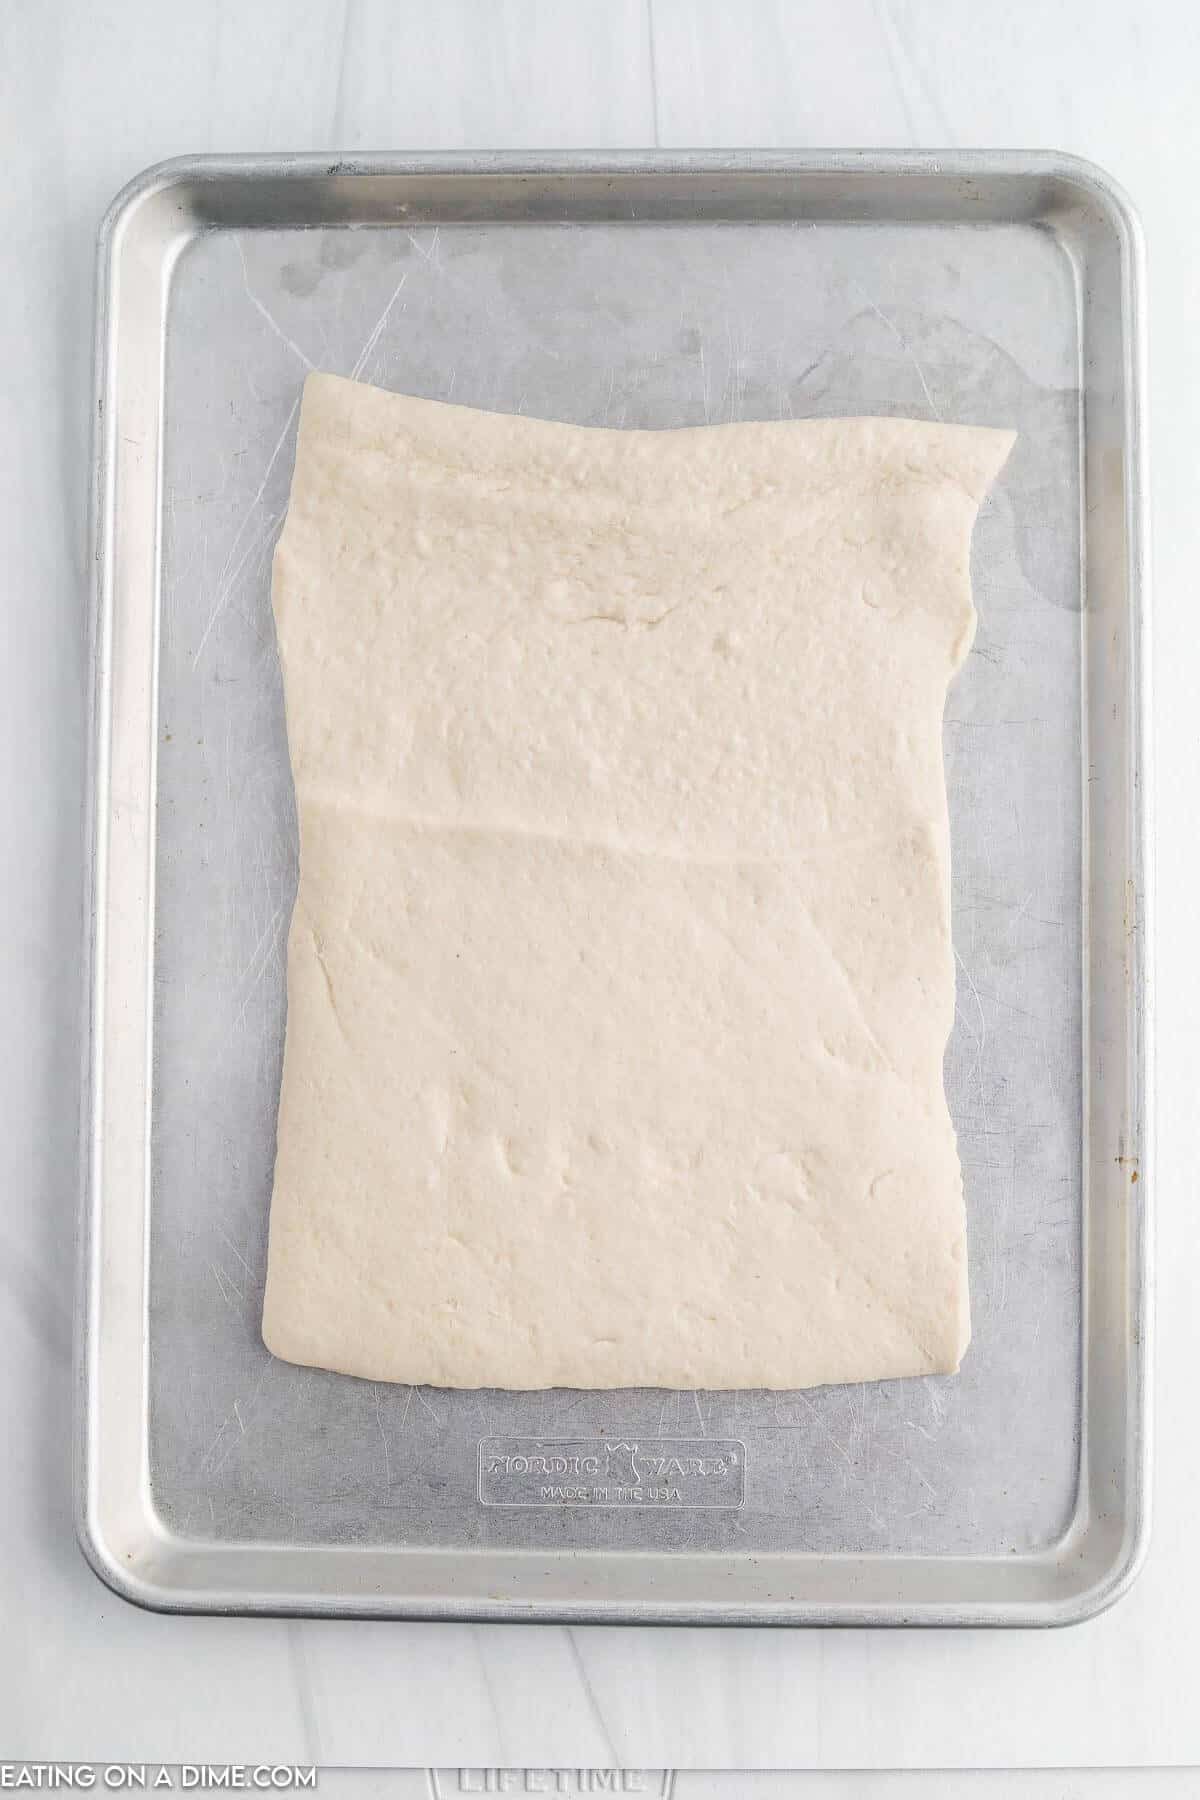 Roll out the pizza dough onto on a baking sheet